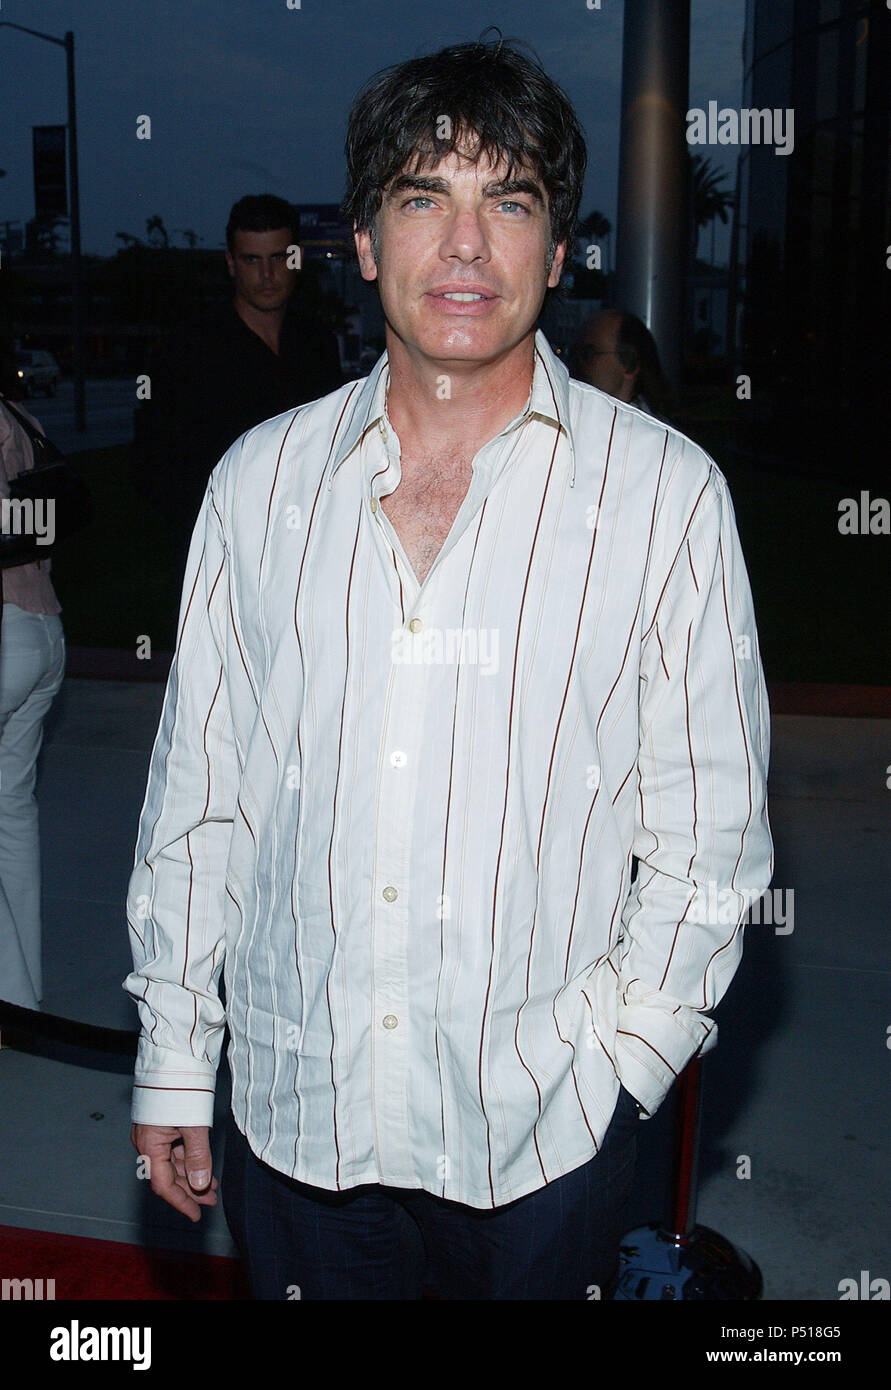 Peter Gallagher (OC) arriving at the ' 2003 Fox Summer tca Party ' at the Pacific Design Center in Los Angeles. july 18, 2003.GallagherPeter OC328 Red Carpet Event, Vertical, USA, Film Industry, Celebrities,  Photography, Bestof, Arts Culture and Entertainment, Topix Celebrities fashion /  Vertical, Best of, Event in Hollywood Life - California,  Red Carpet and backstage, USA, Film Industry, Celebrities,  movie celebrities, TV celebrities, Music celebrities, Photography, Bestof, Arts Culture and Entertainment,  Topix, vertical, one person,, from the years , 2003 to 2005, inquiry tsuni@Gamma-US Stock Photo